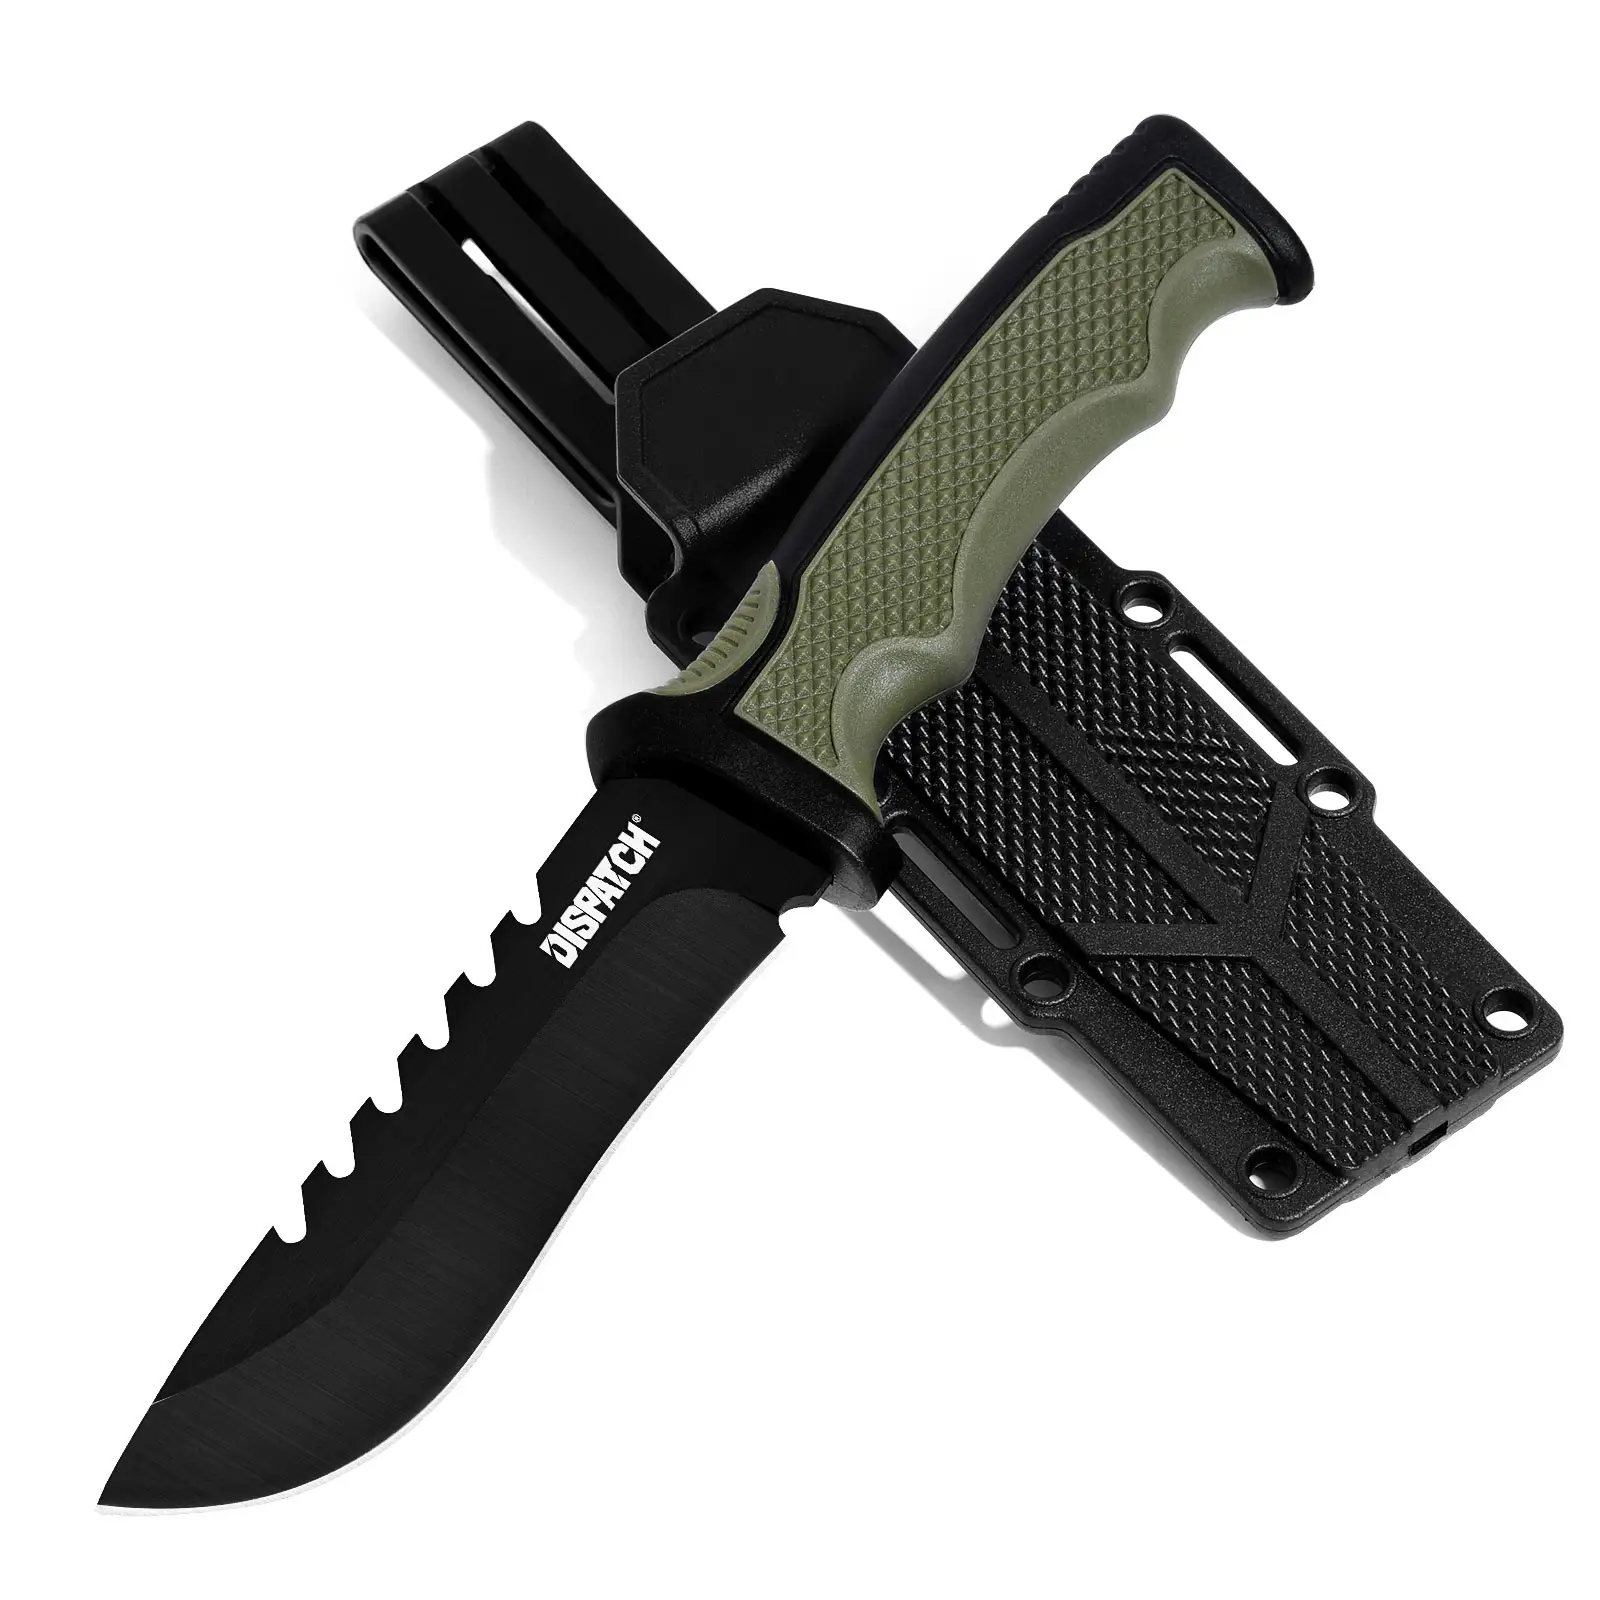 Custom wholesale Survival Camping Hunting fixed blade knife knives tactical combat edc self defense knifes for Outdoor